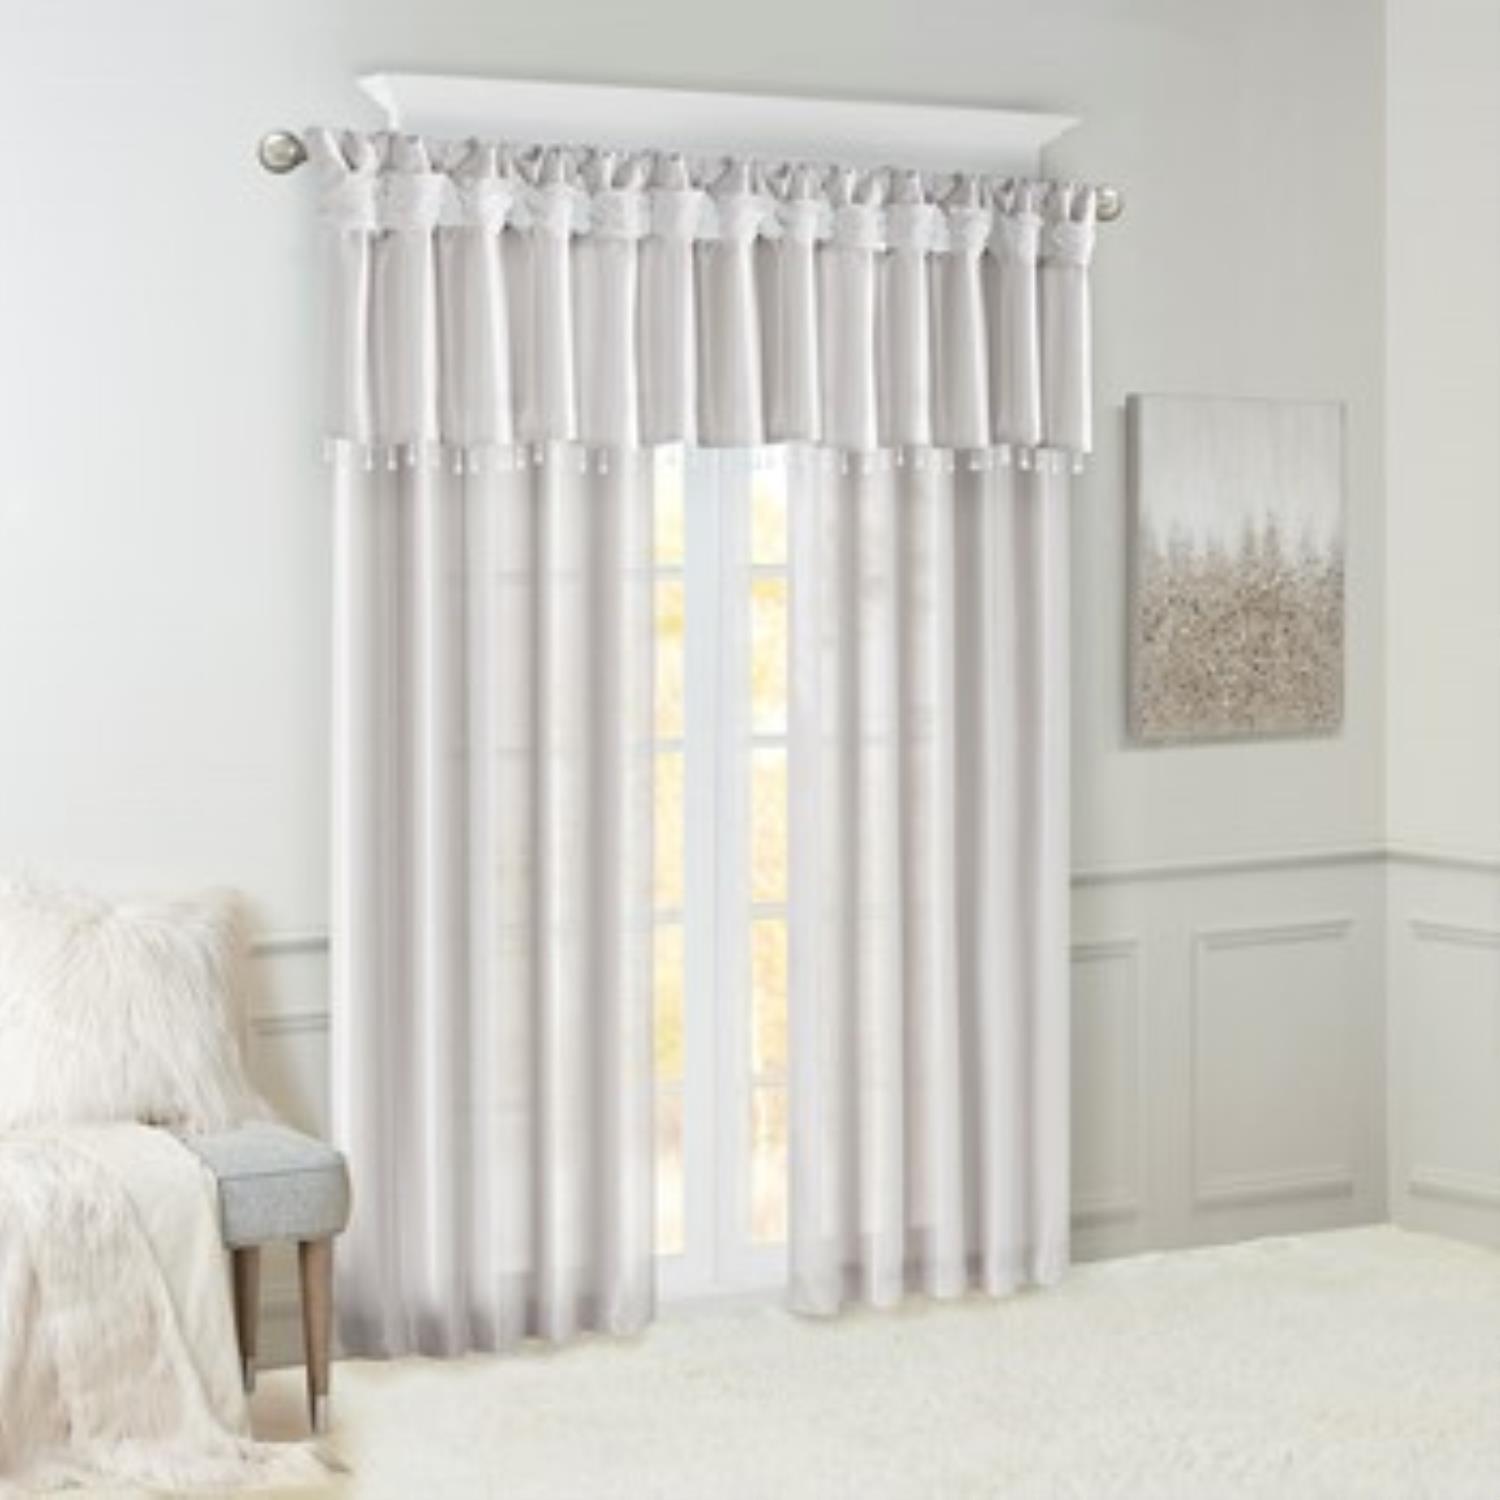 Olliix Madison Park Polyester Twist Tab Lined Window Curtain With Silver MP40-6327